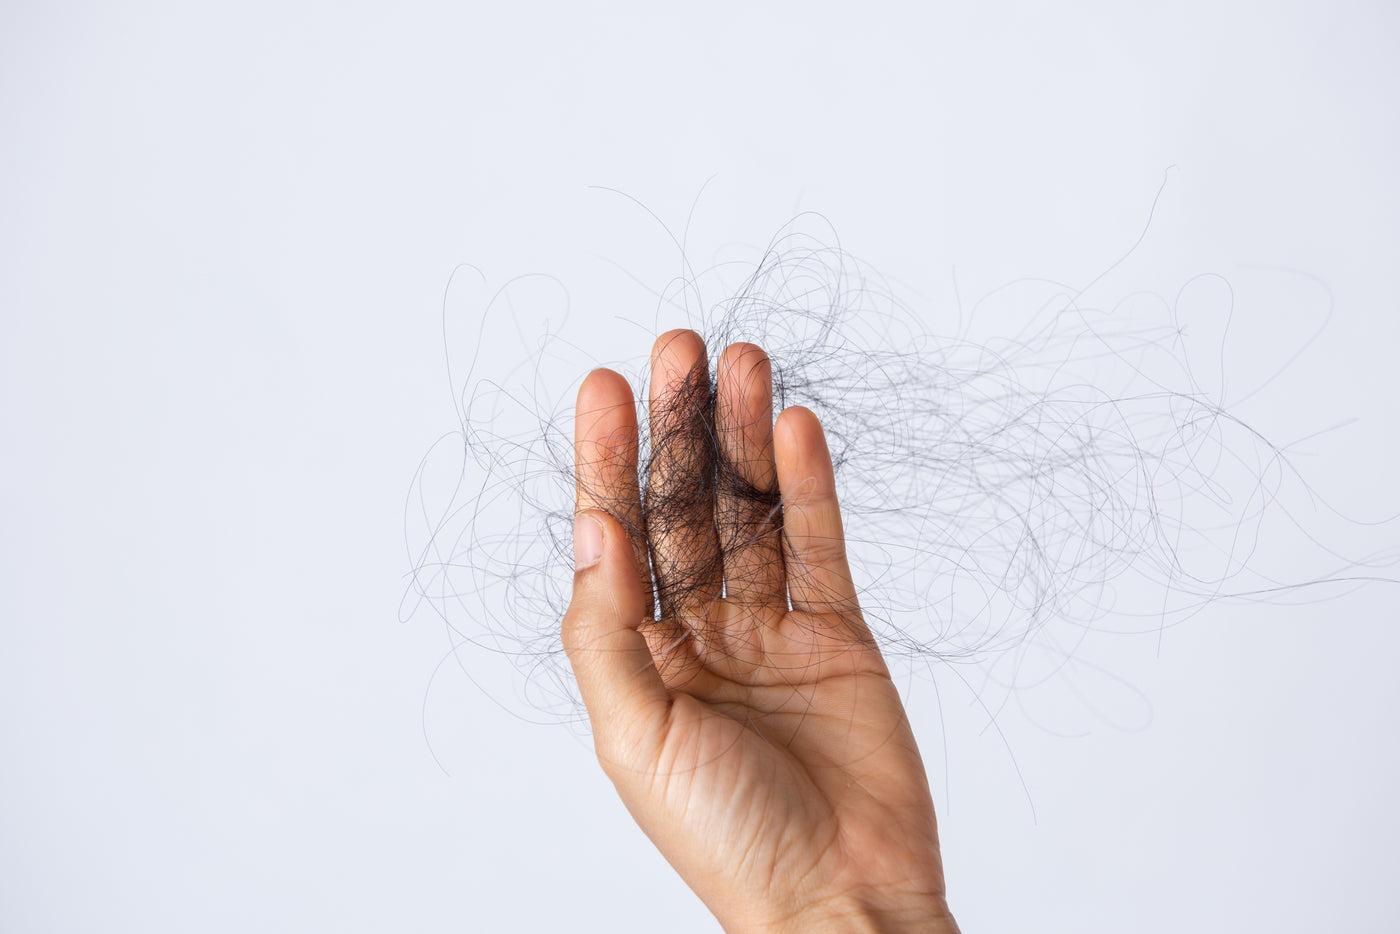 How Much Hair Loss Is Normal?